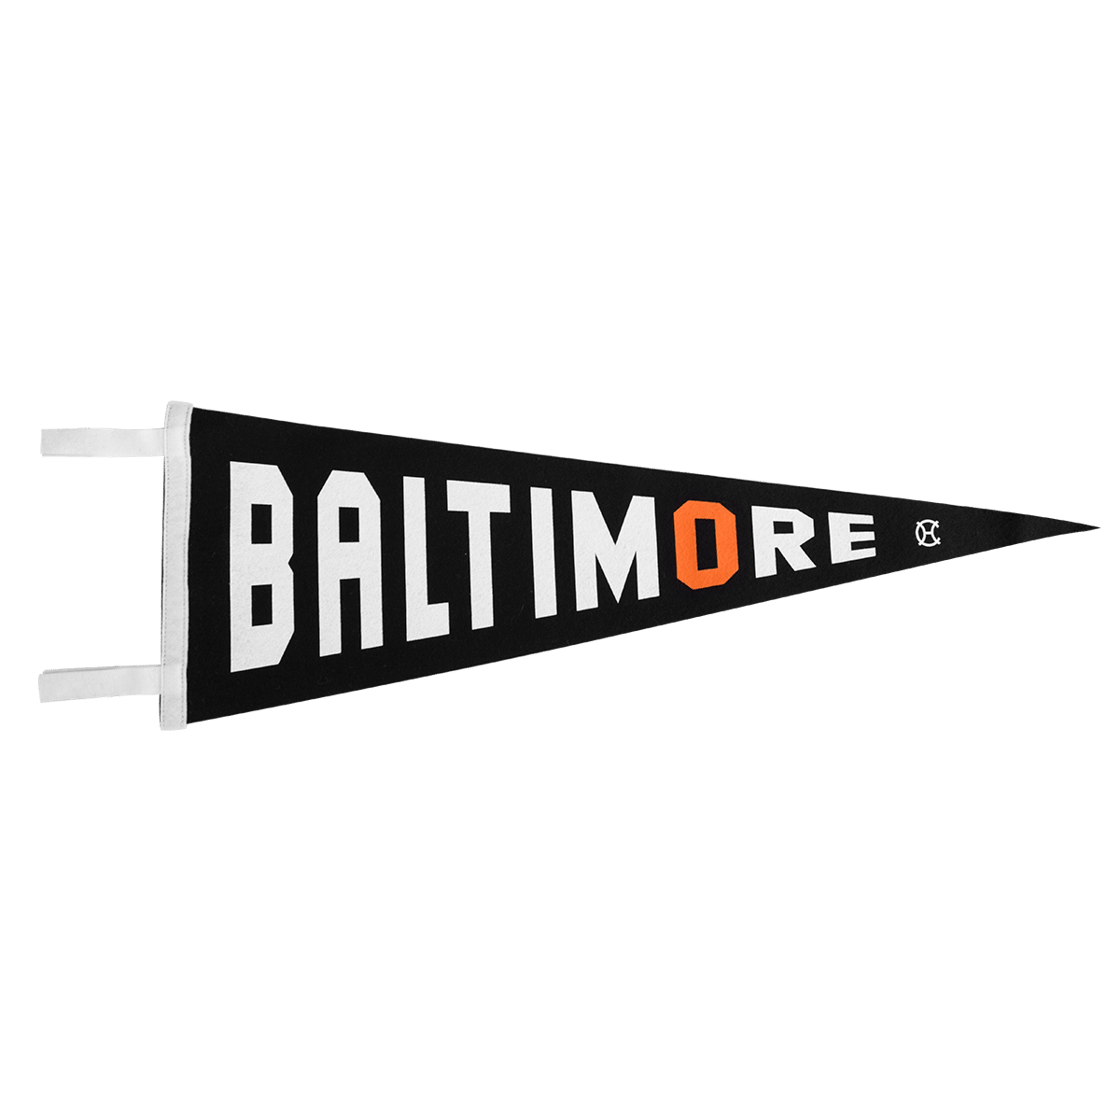 Image of Baltimore Pennant